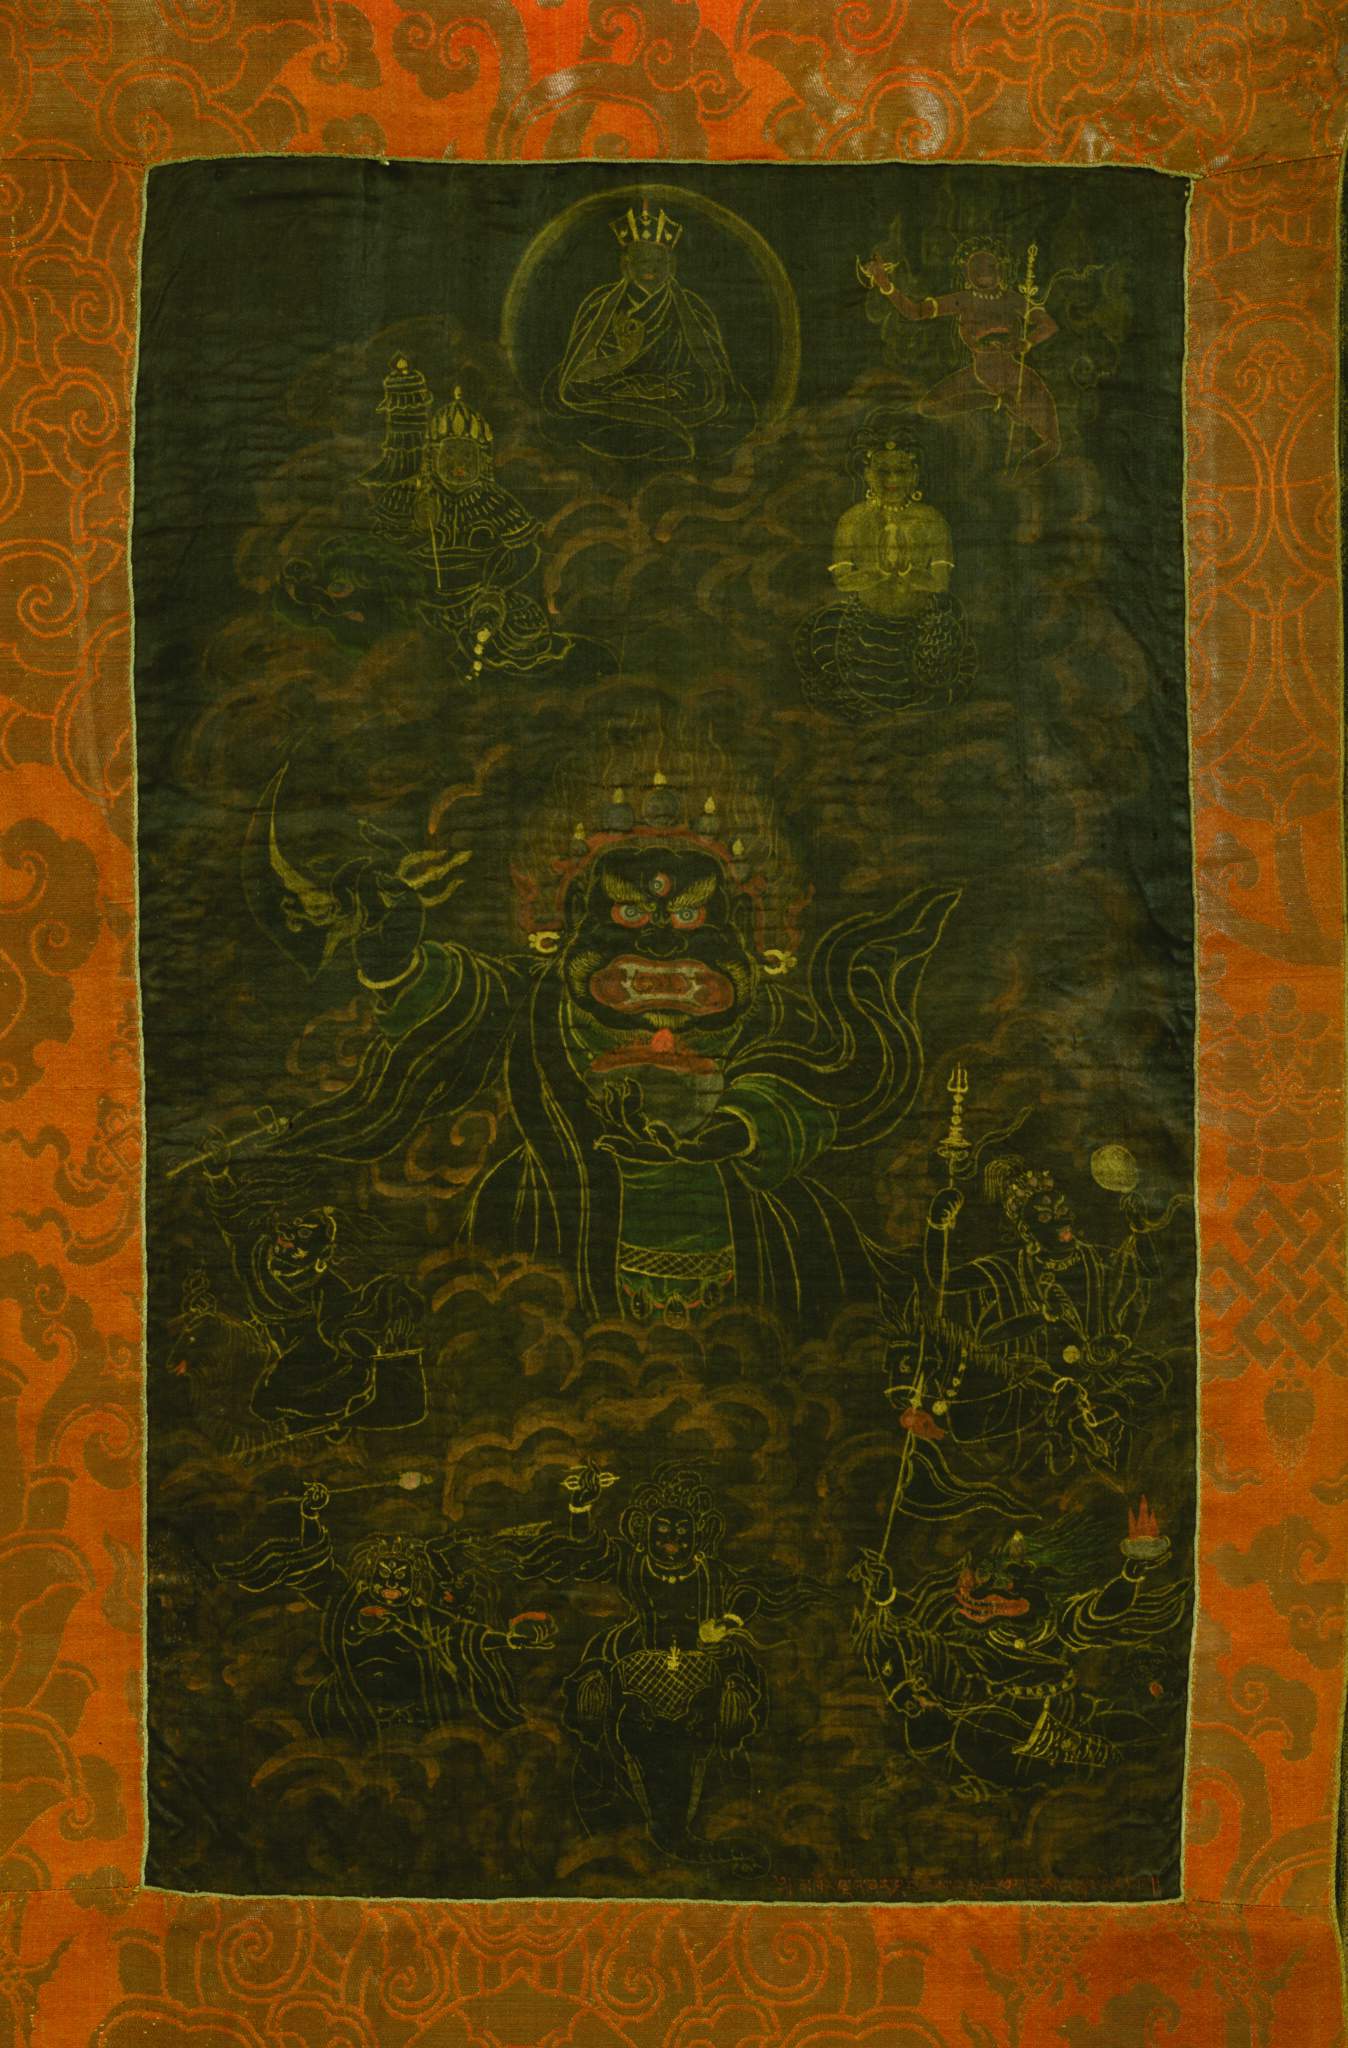 Black and yellow painting mounted on golden brocade depicting fearsome deity dressed in swirling cloak